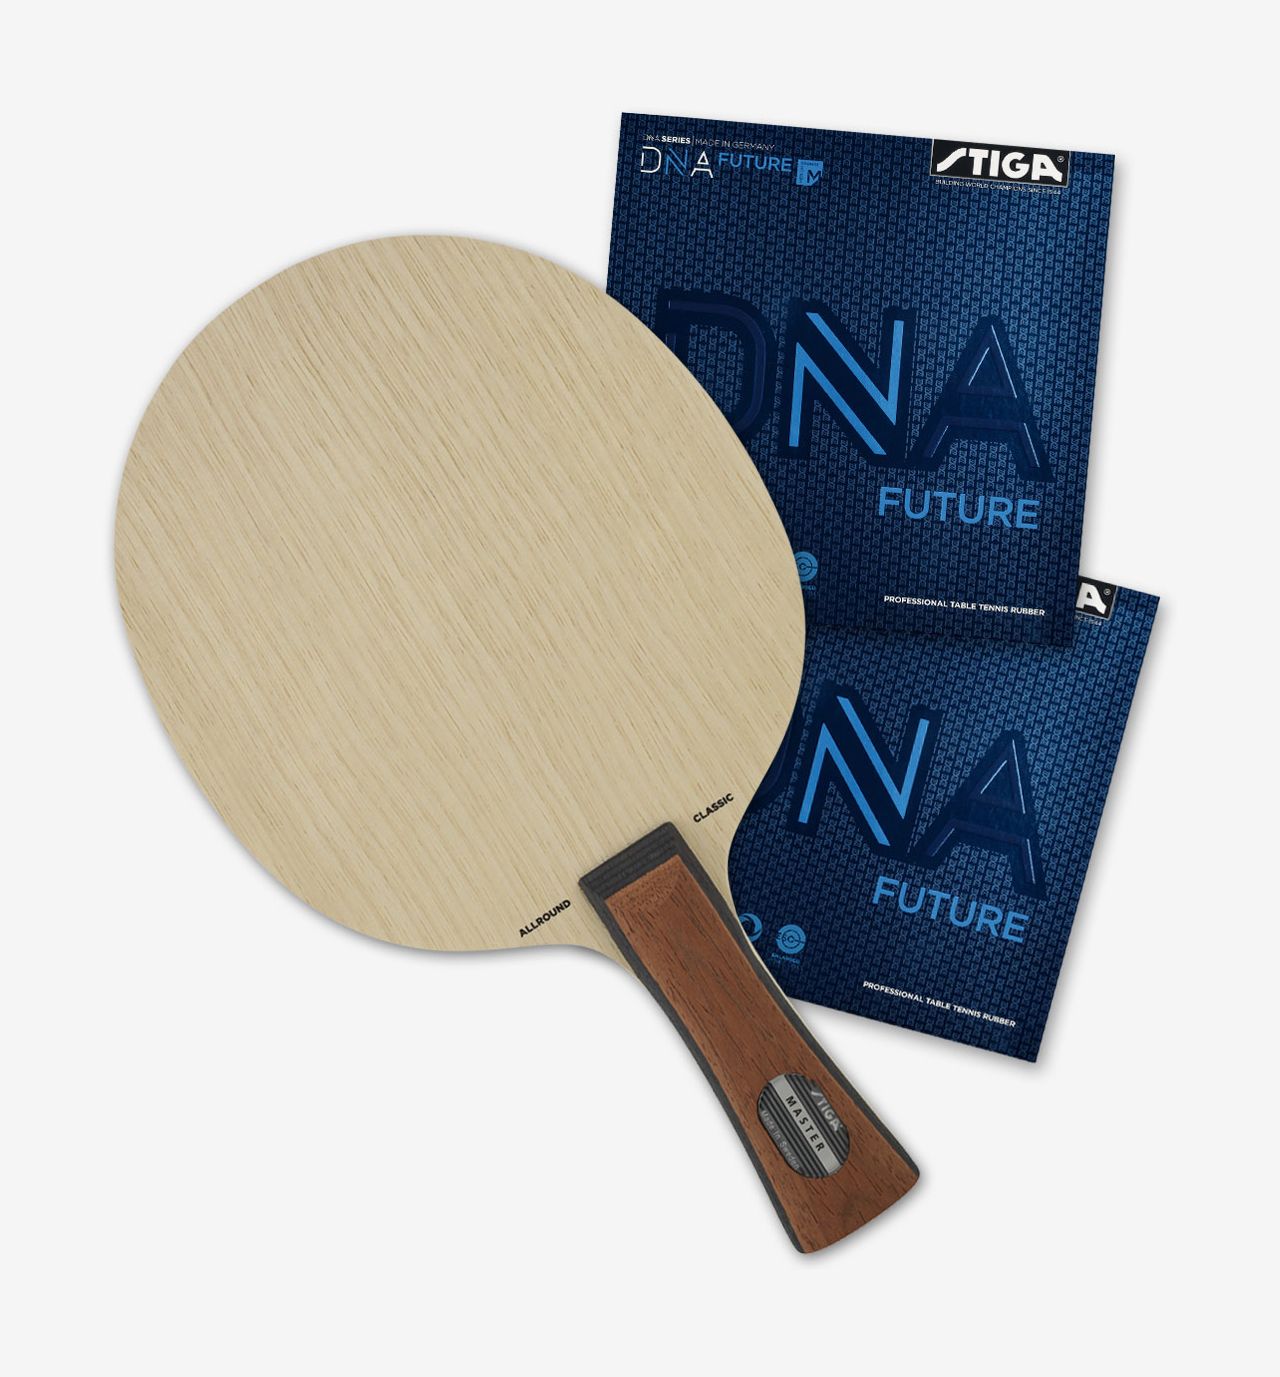 11 Best Ping Pong Paddles 2020